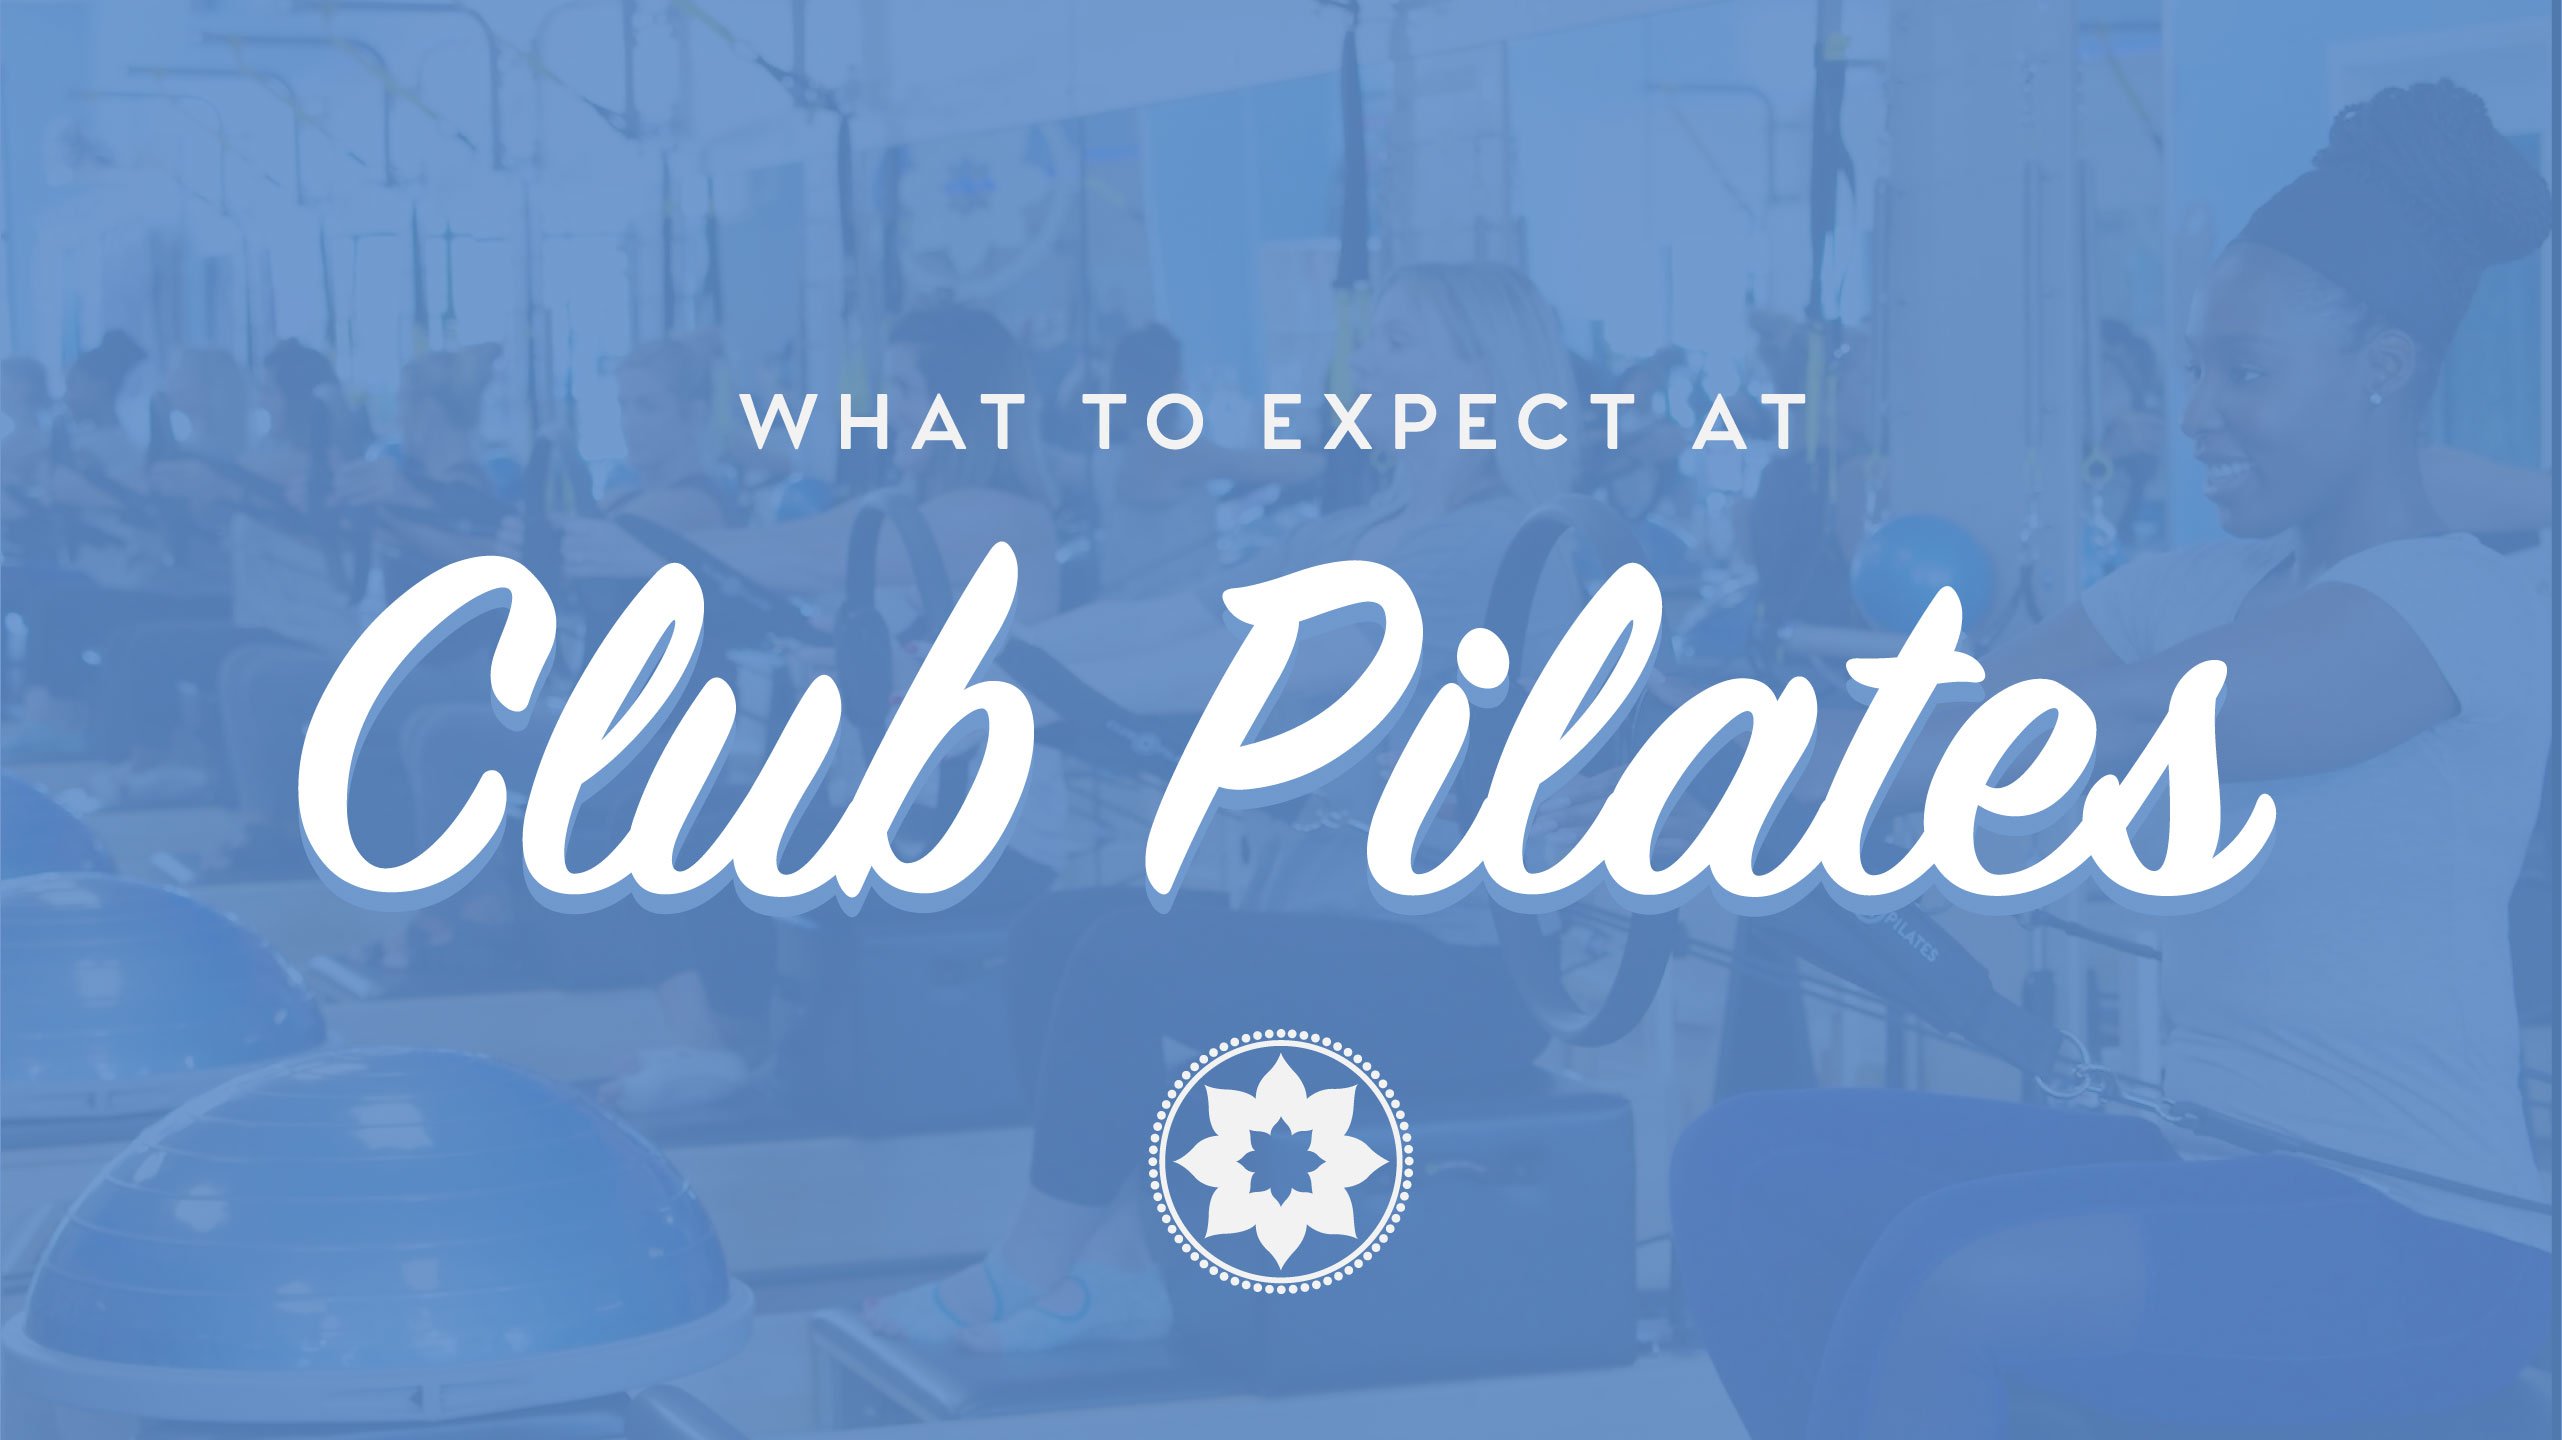 Welcome to Club Pilates! 